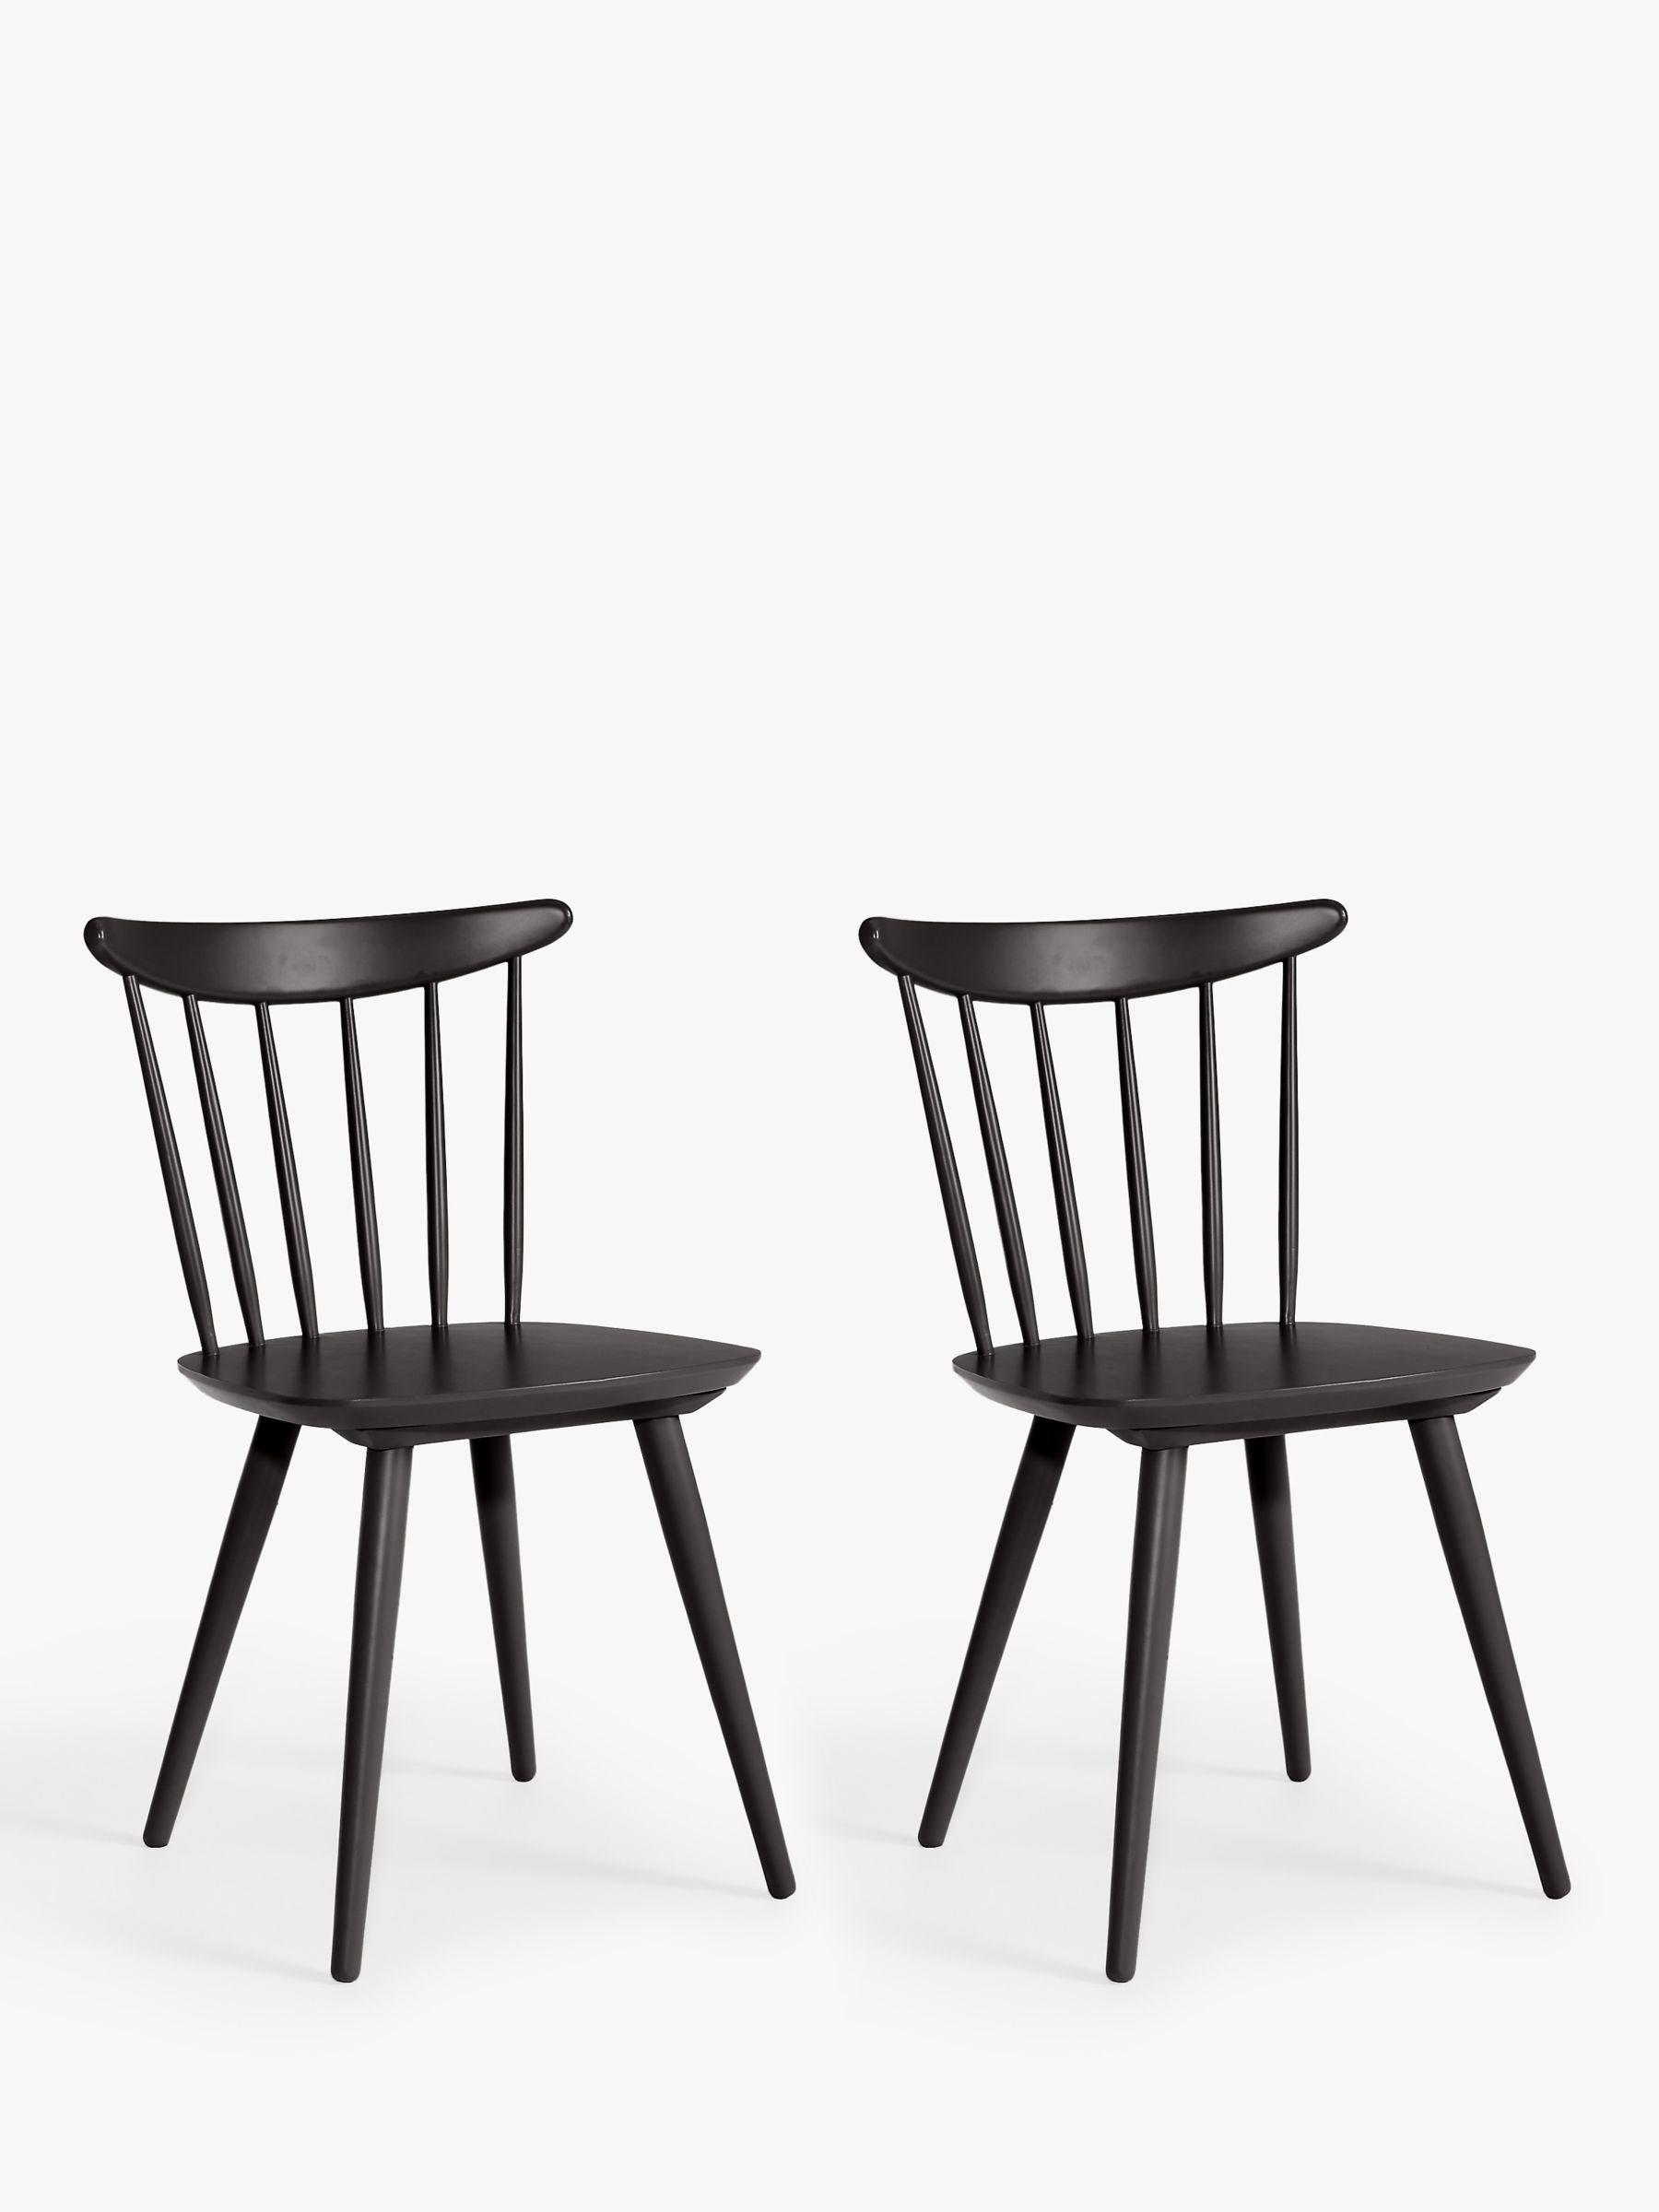 Black Wood Dining Chairs John Lewis, Black Wooden Dining Chairs With Arms